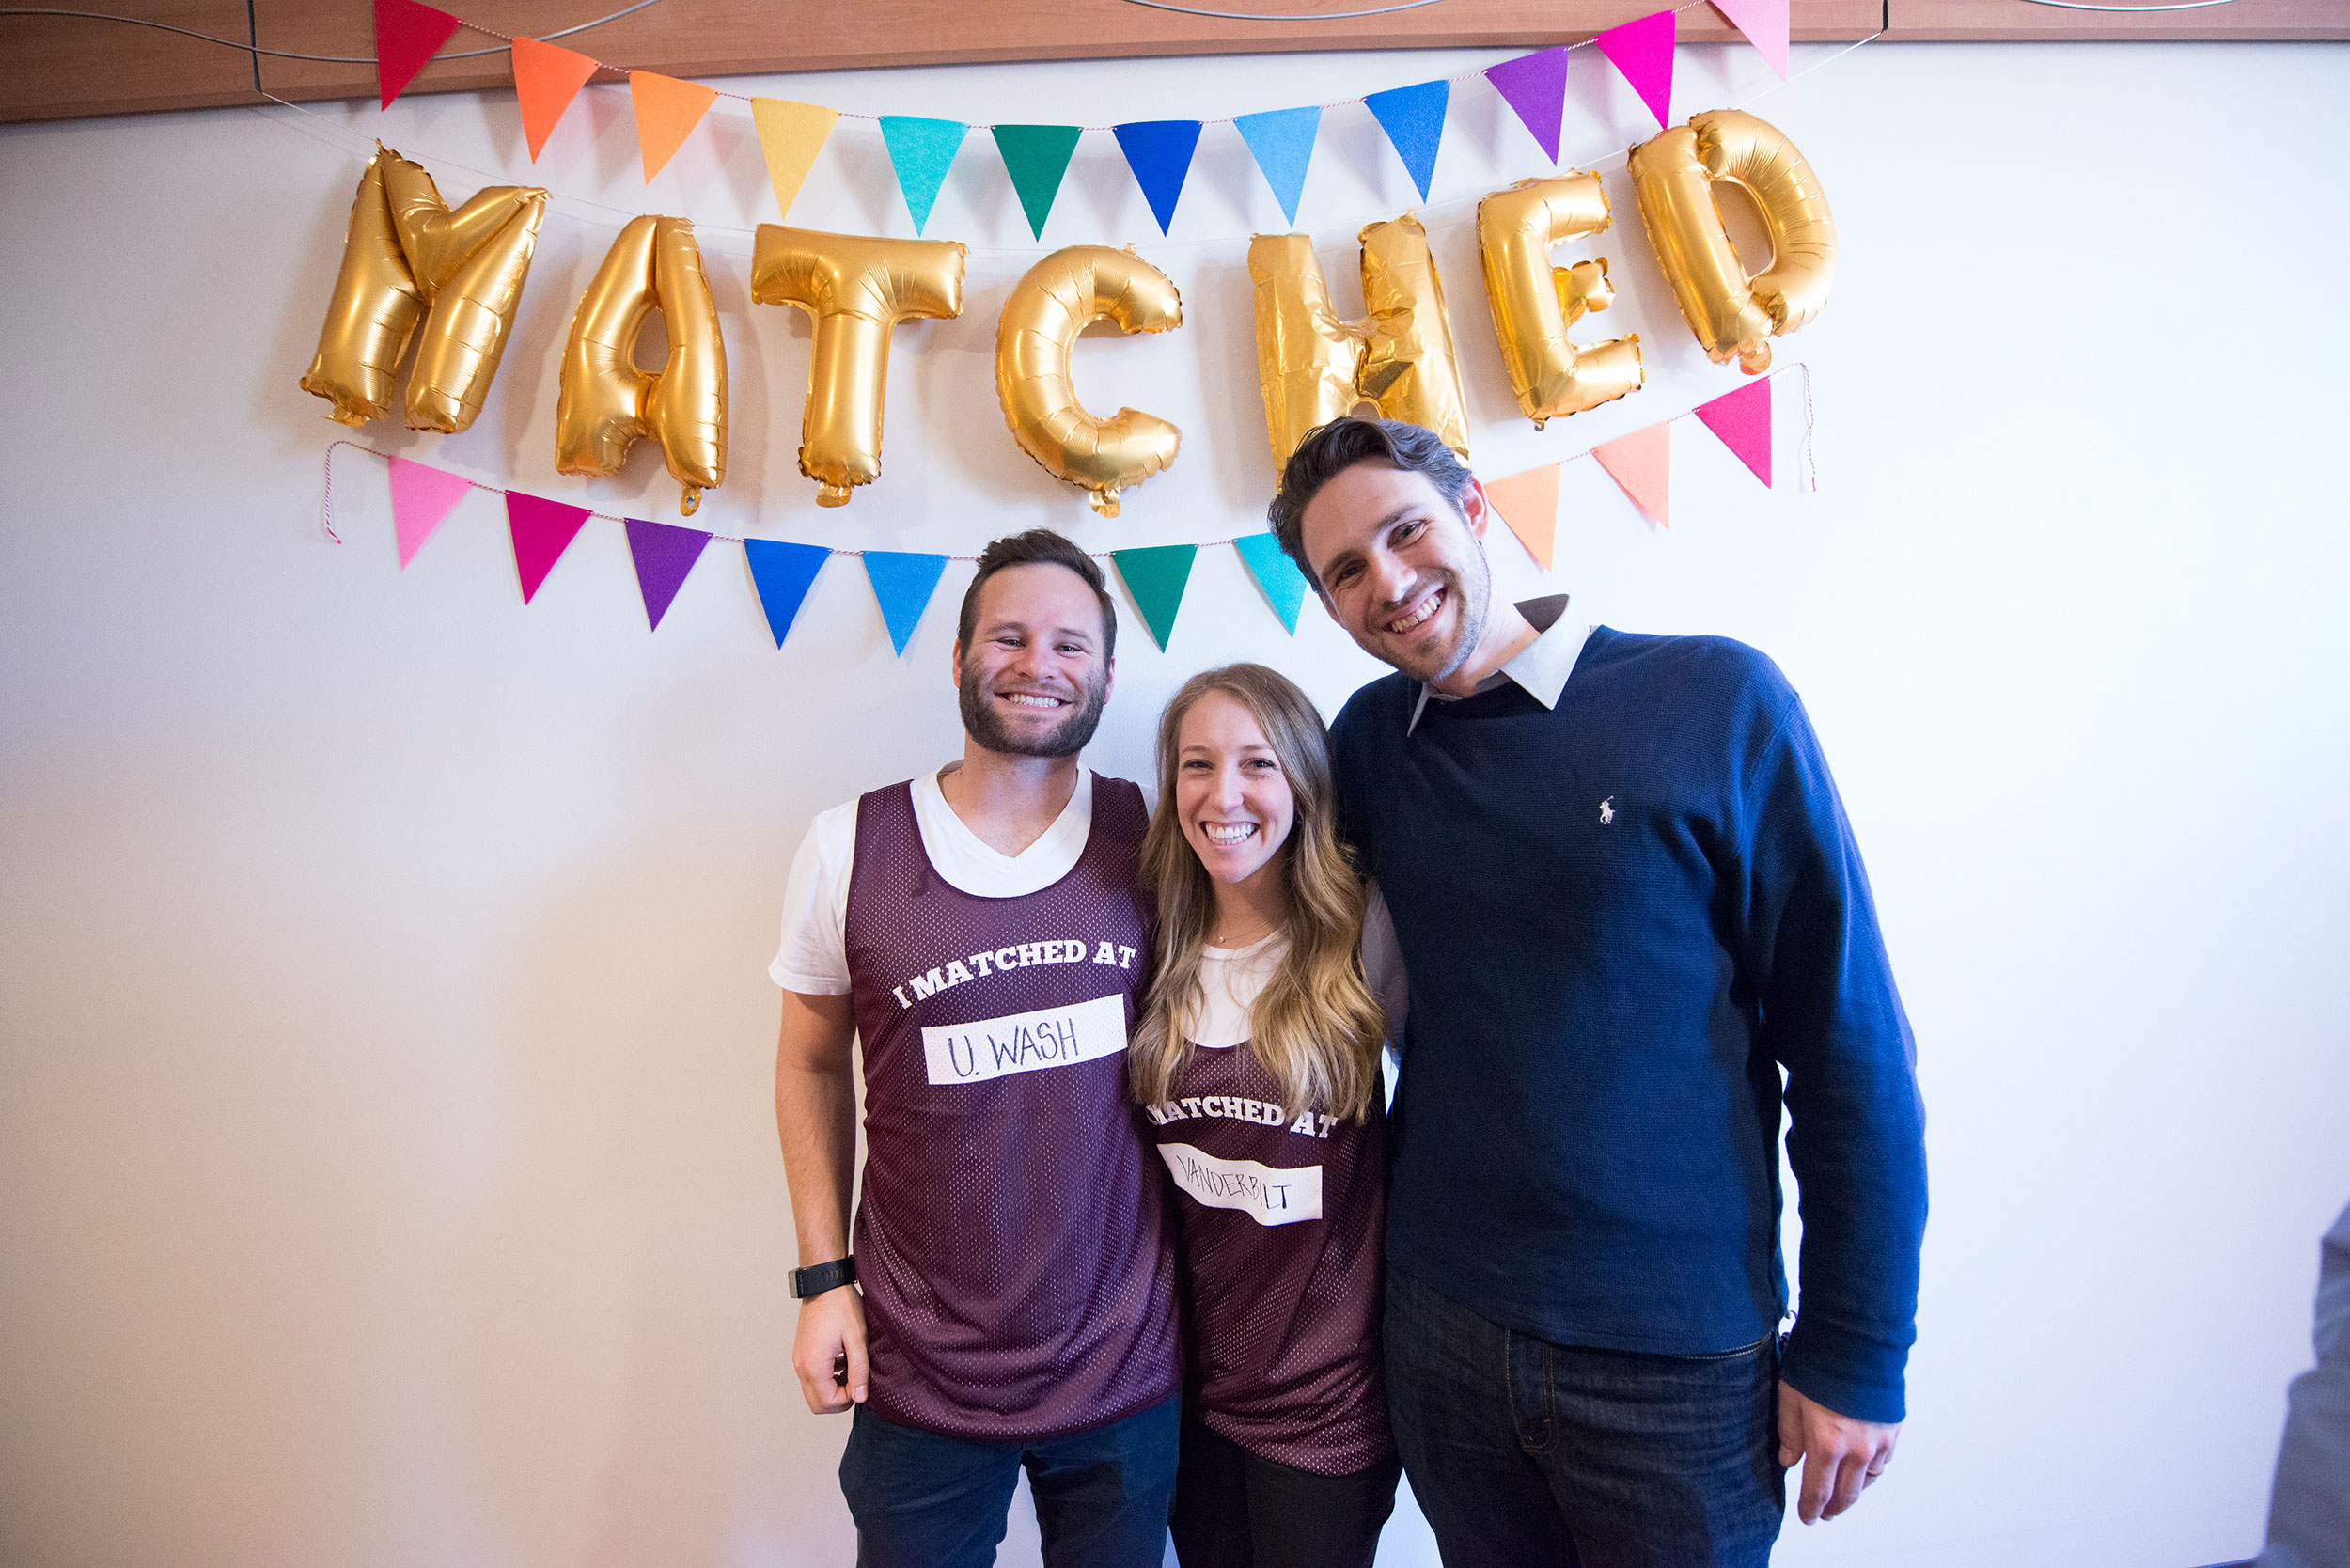 Medical school students Zakk Walterscheid (’18) and Lia Manfredi (’18) celebrate with friends and family on Match Day.